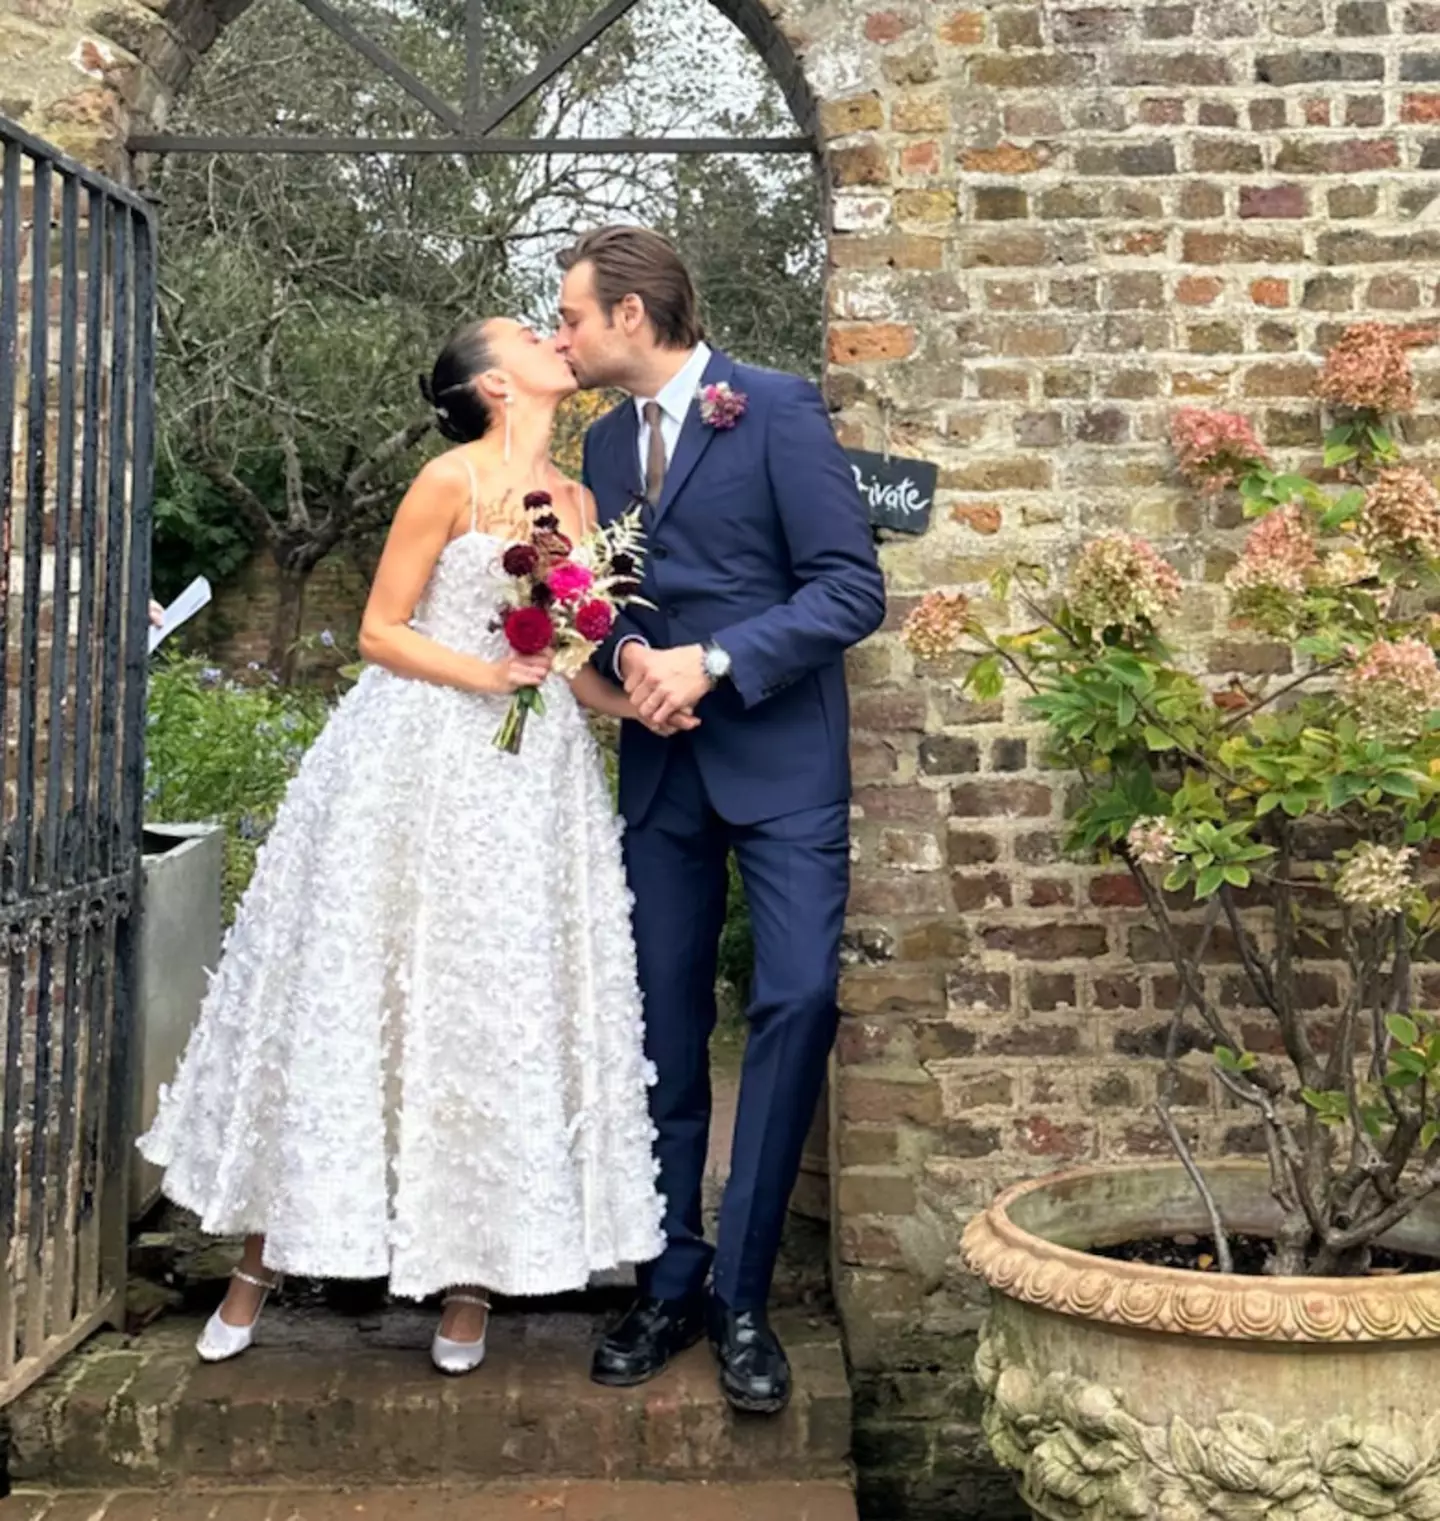 Bel Powley and Douglas Booth have tied the knot.